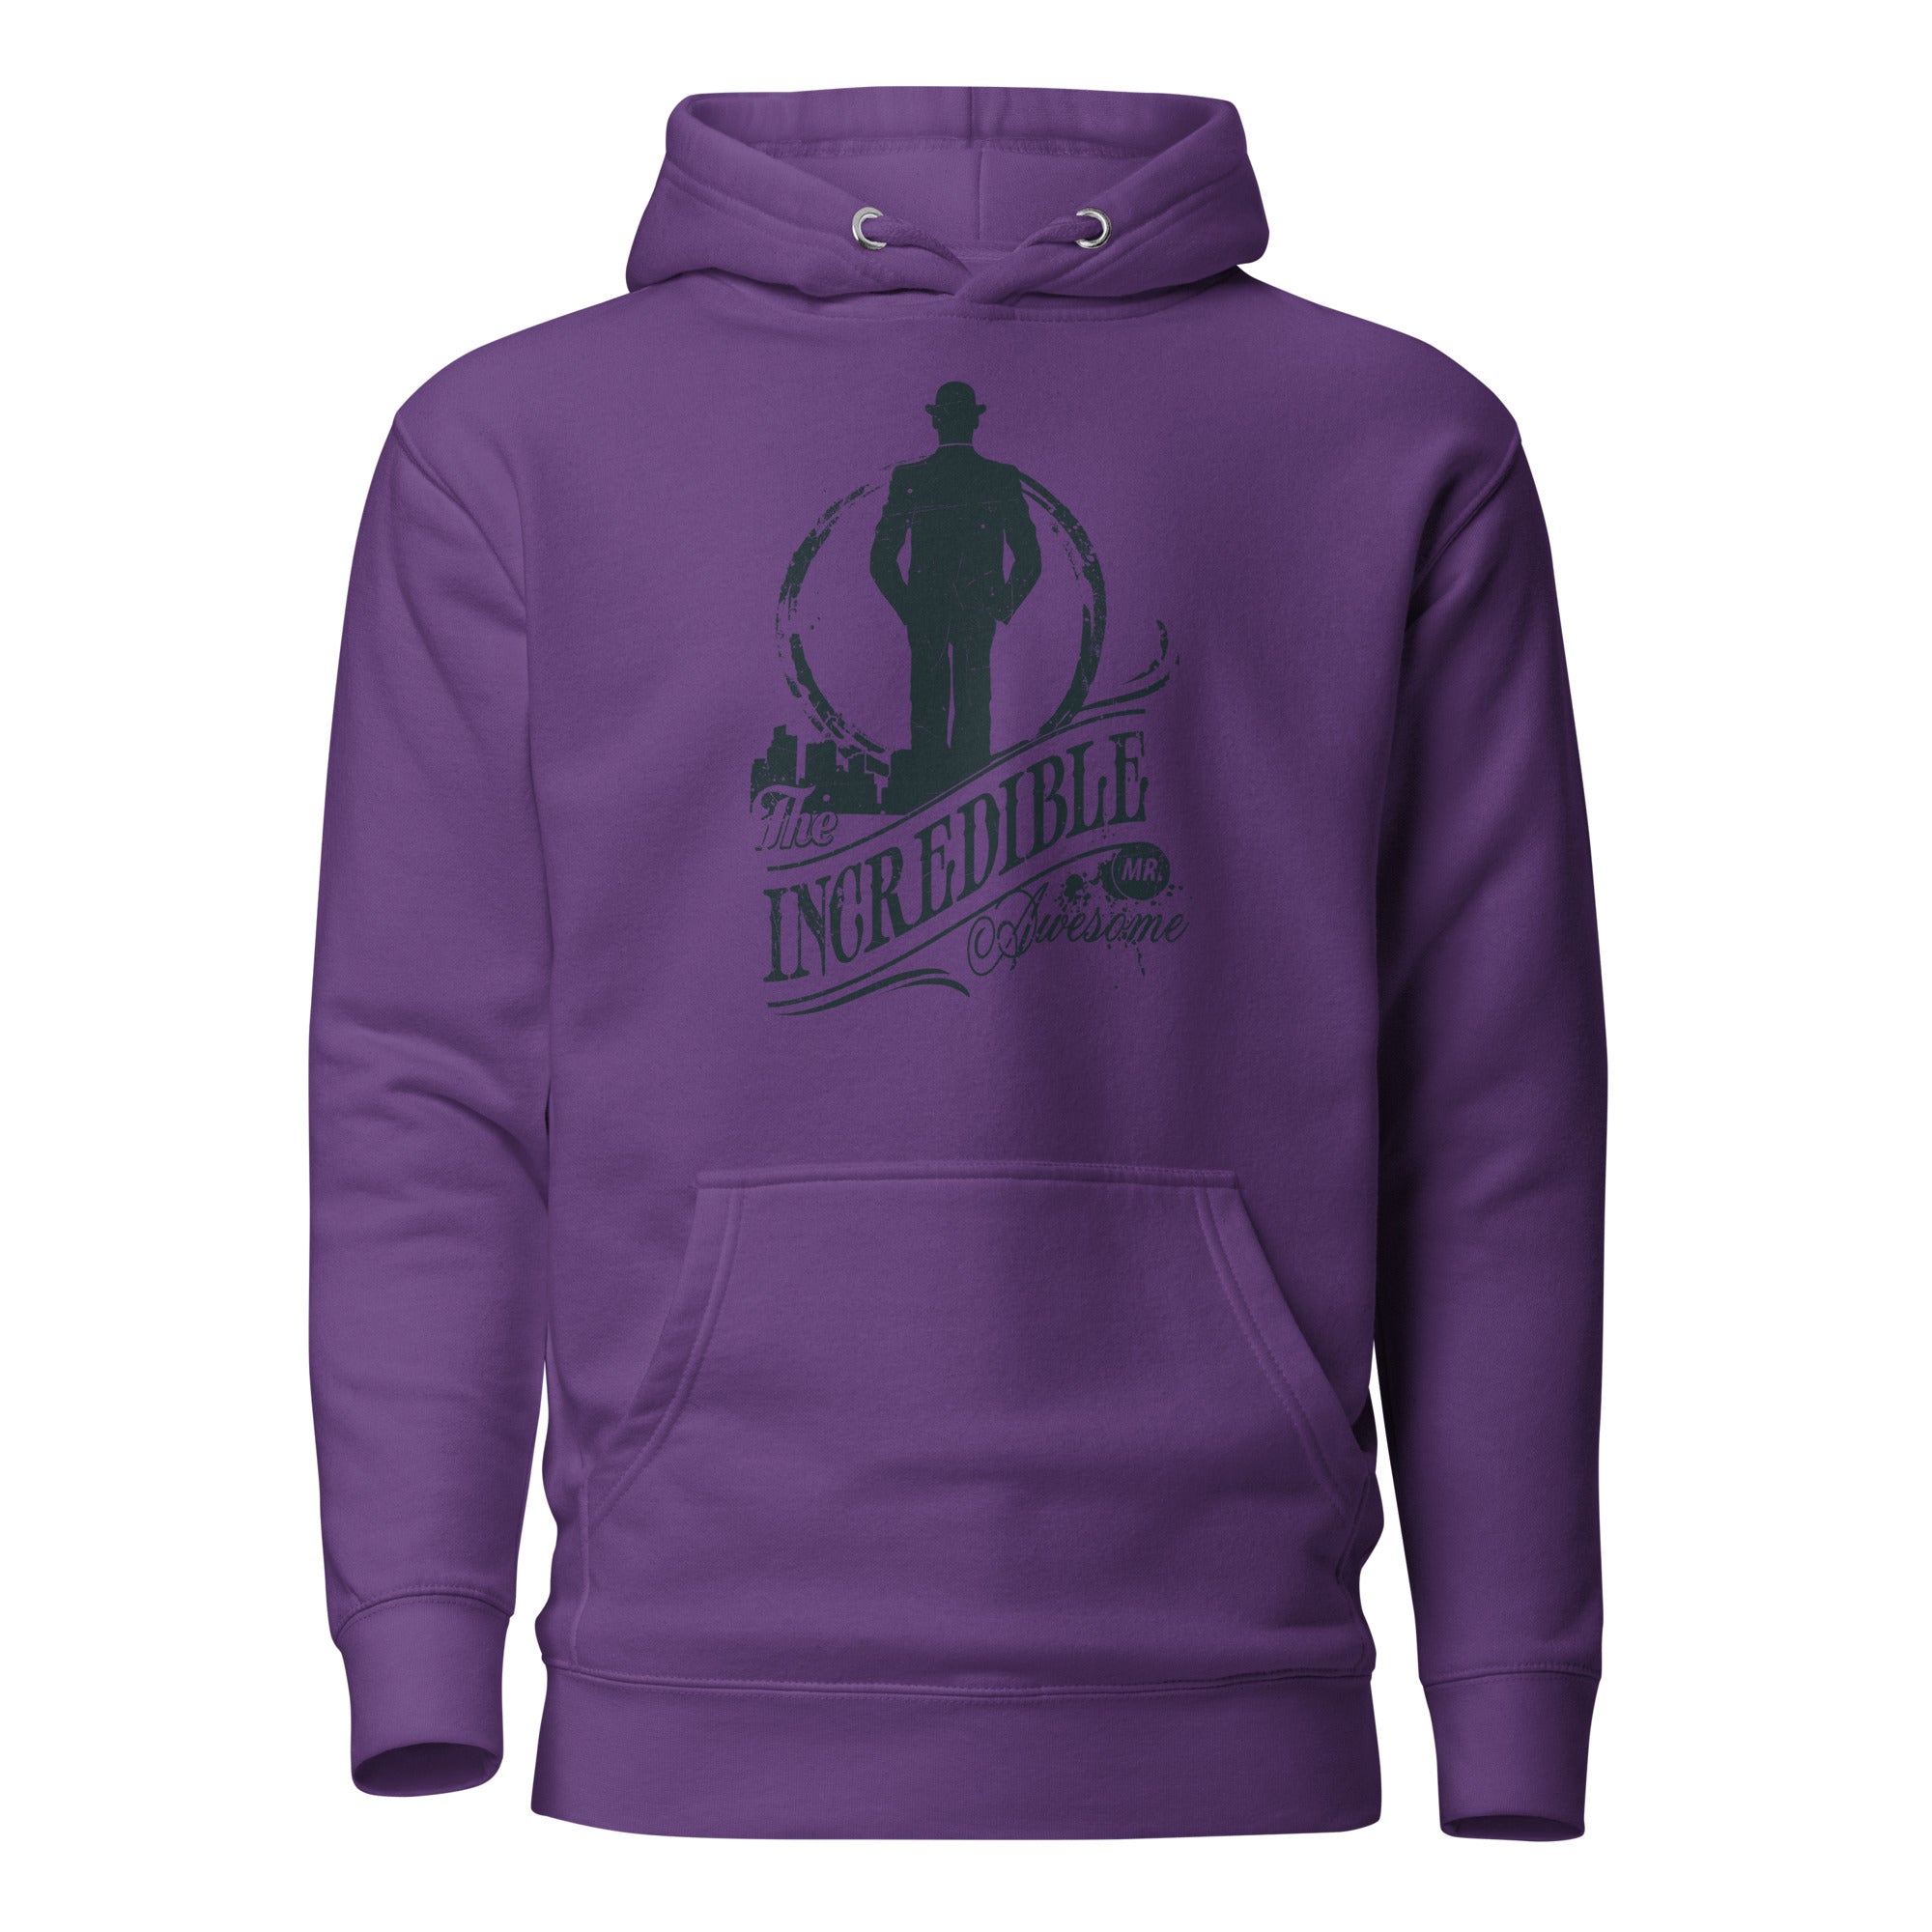 Unisex Premium Hoodie - Cotton Heritage - The Incredible Mr Awesome Vintage - GRAPHIC T-SHIRTS